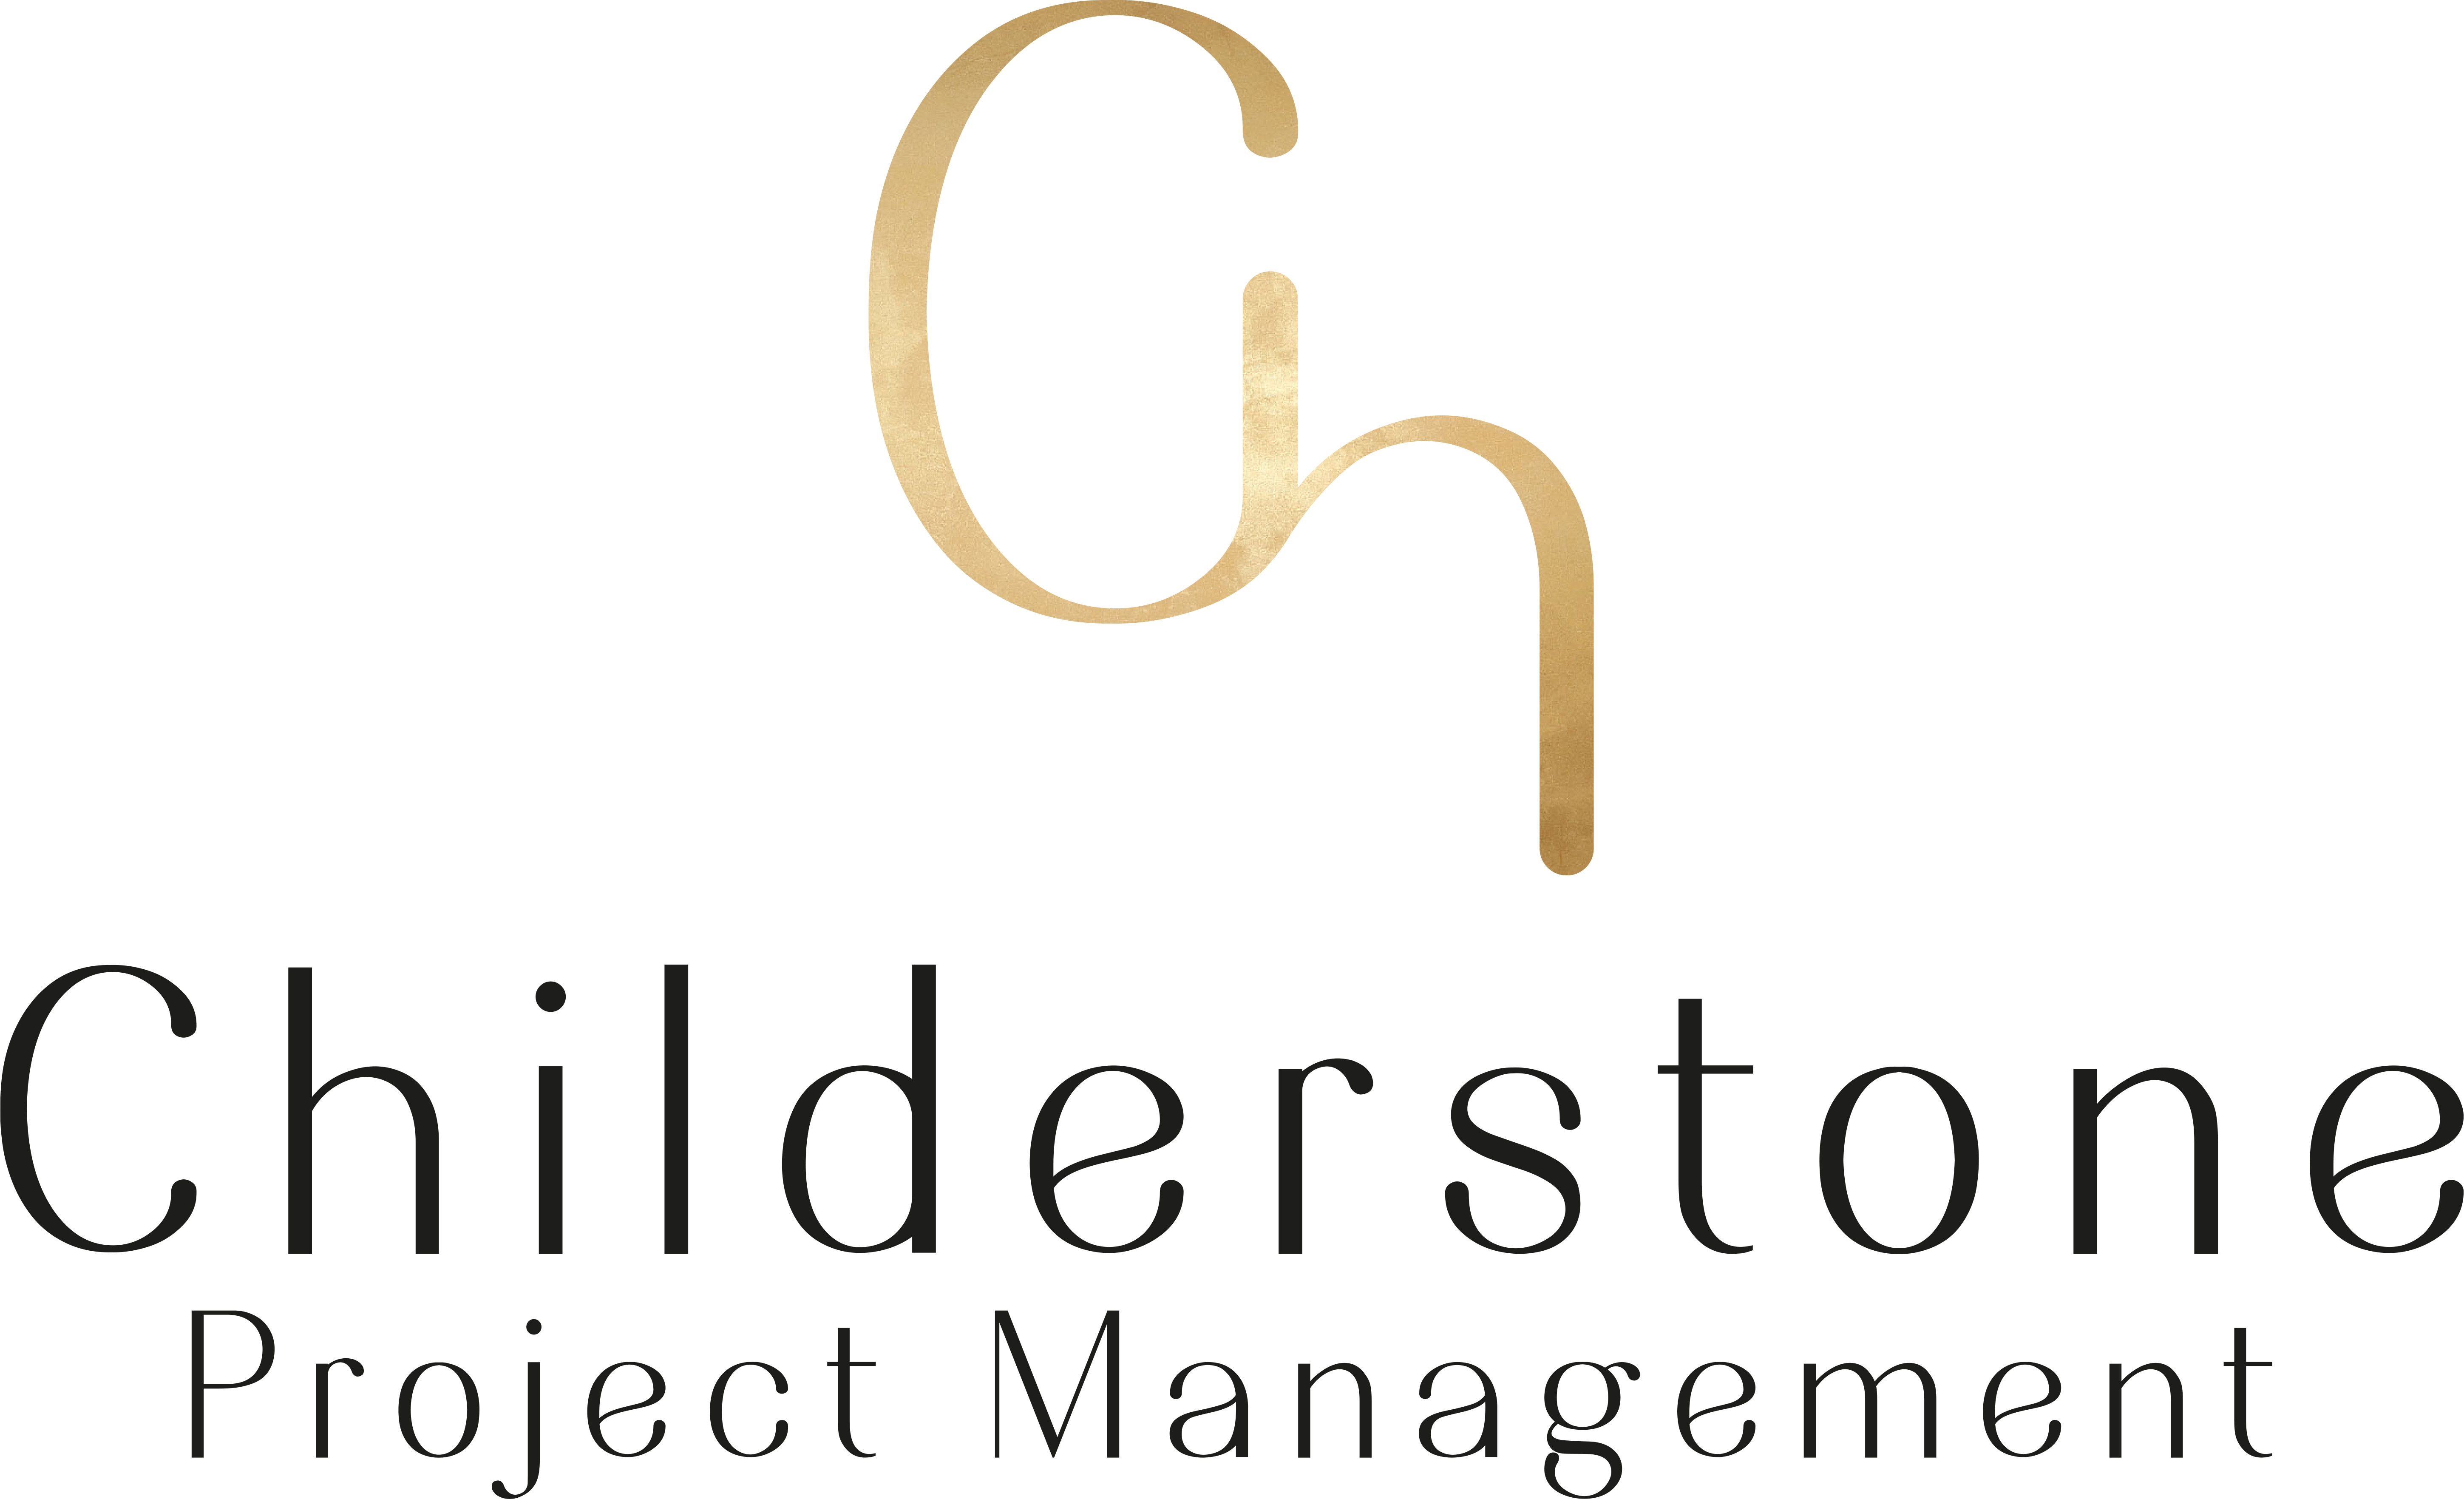 logo for Childerstone Project Management